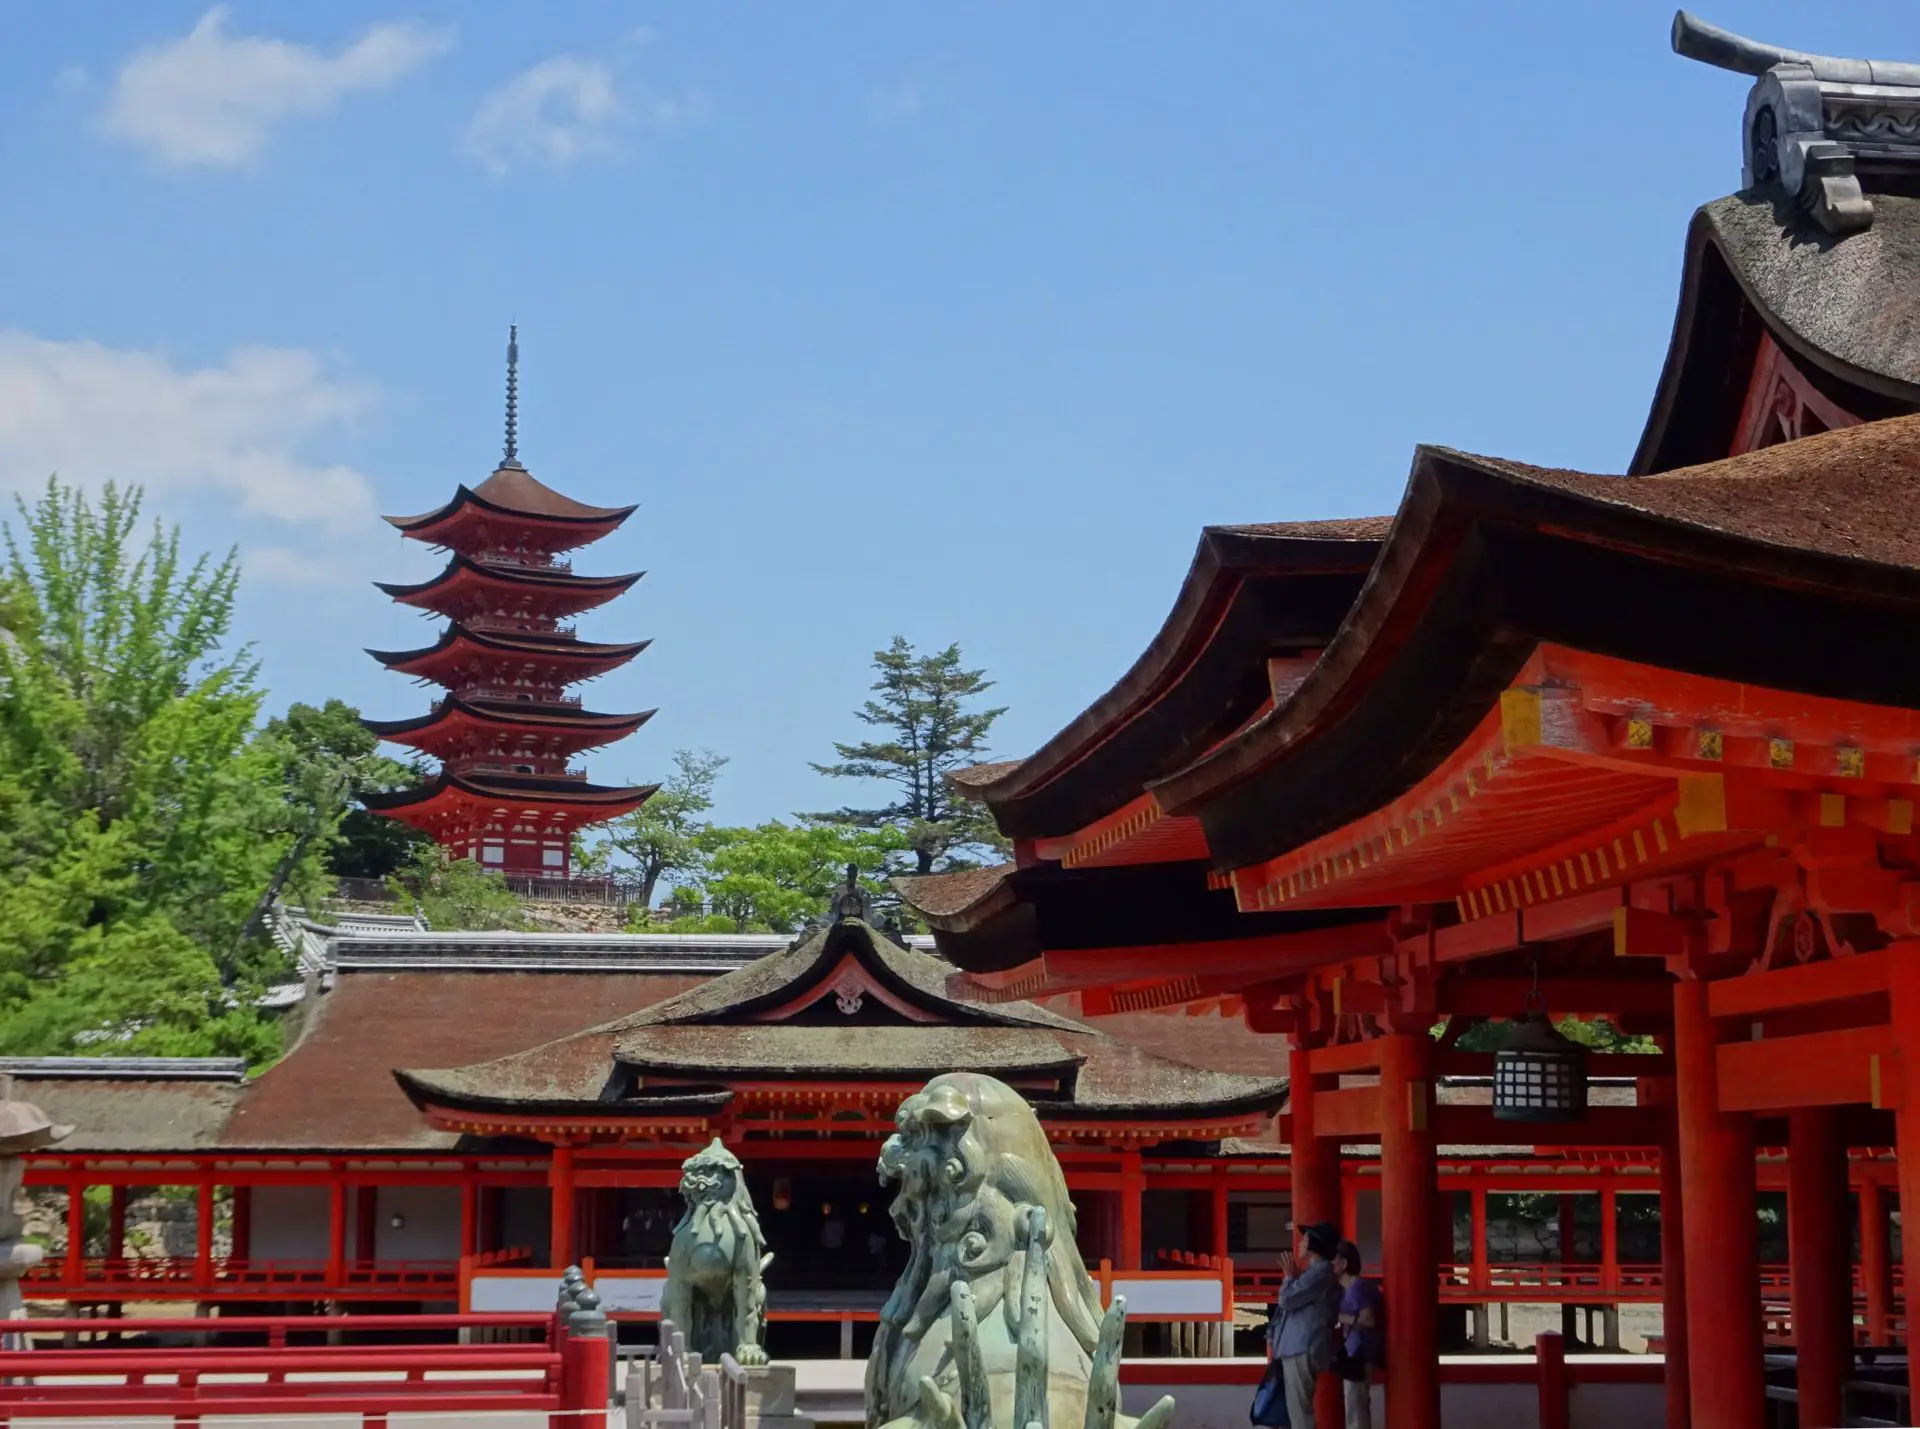 A five-storied pagoda seen over a group of red temple buildings